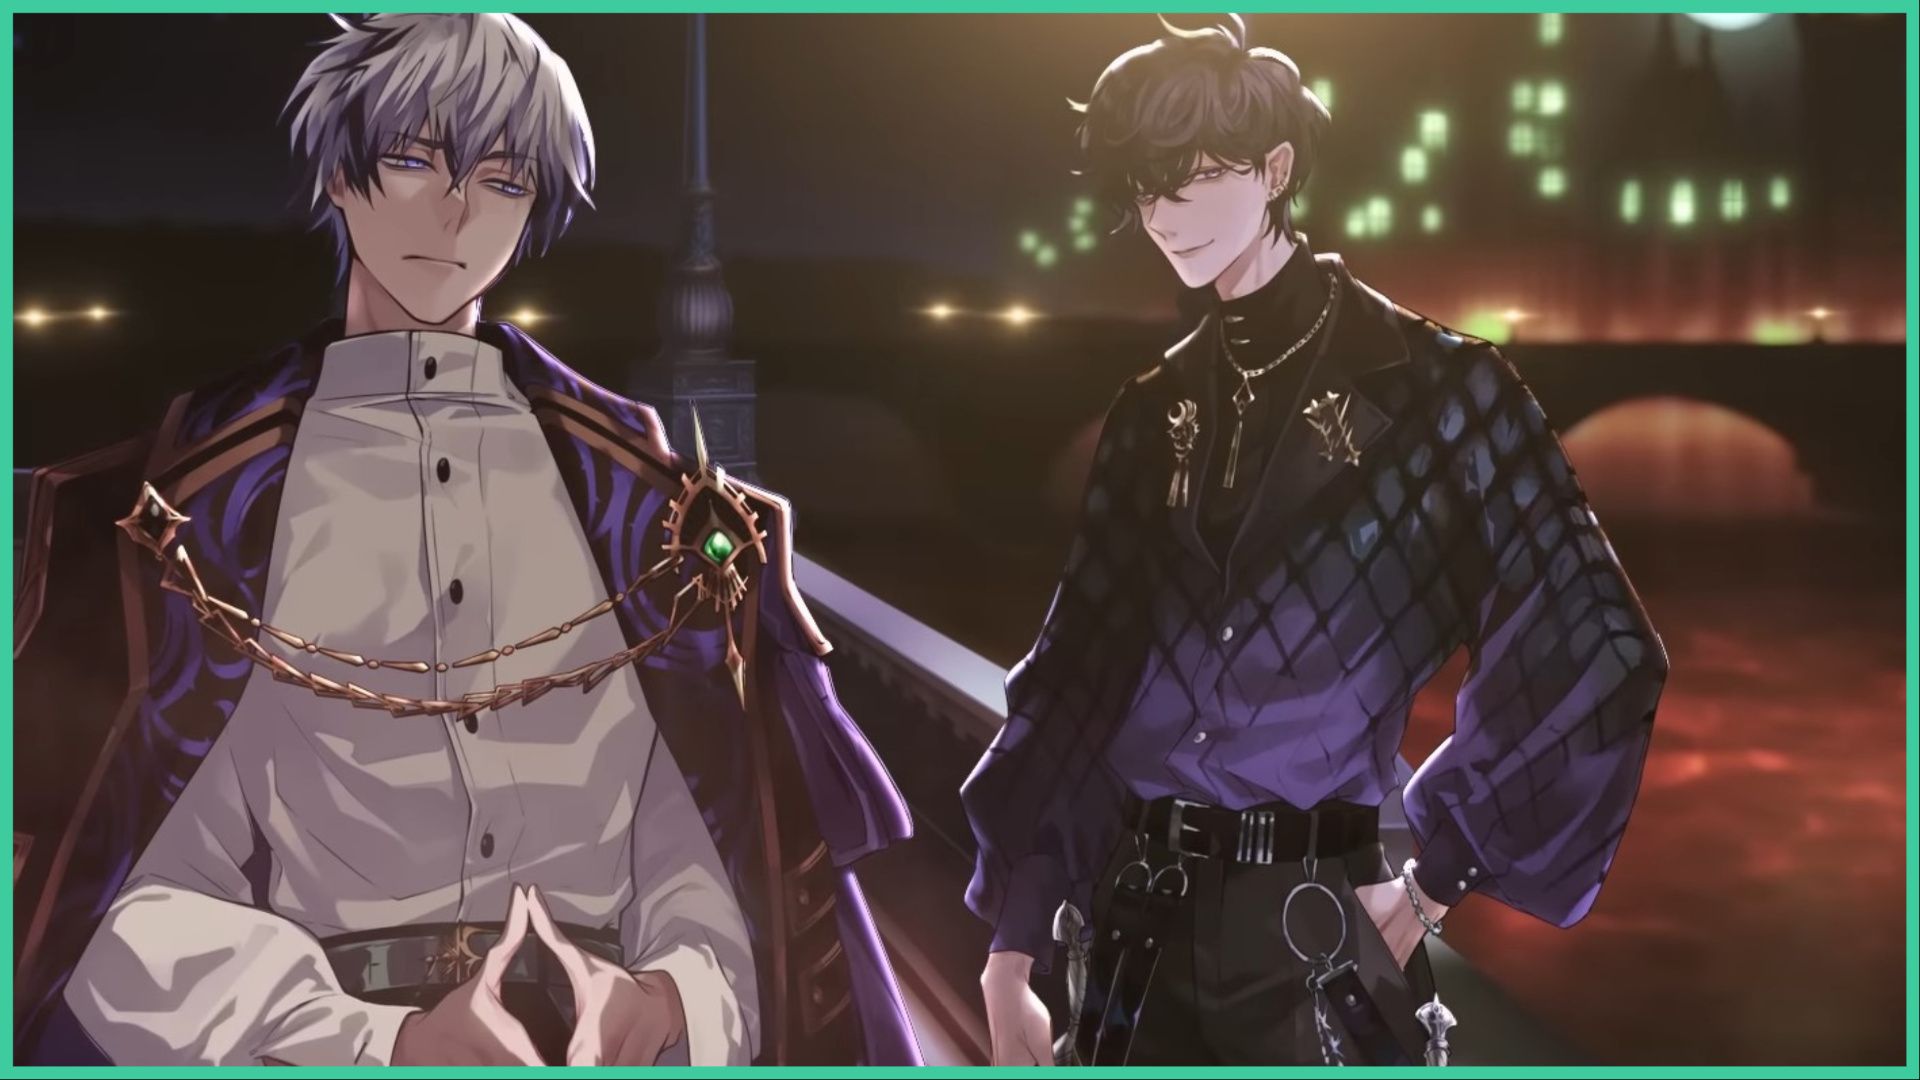 feature image for our ikemen villains cards guide, the image is a screenshot from the game's trailer, of 2 characters from the game standing by the river thames at night, as the streetlamps light up the river